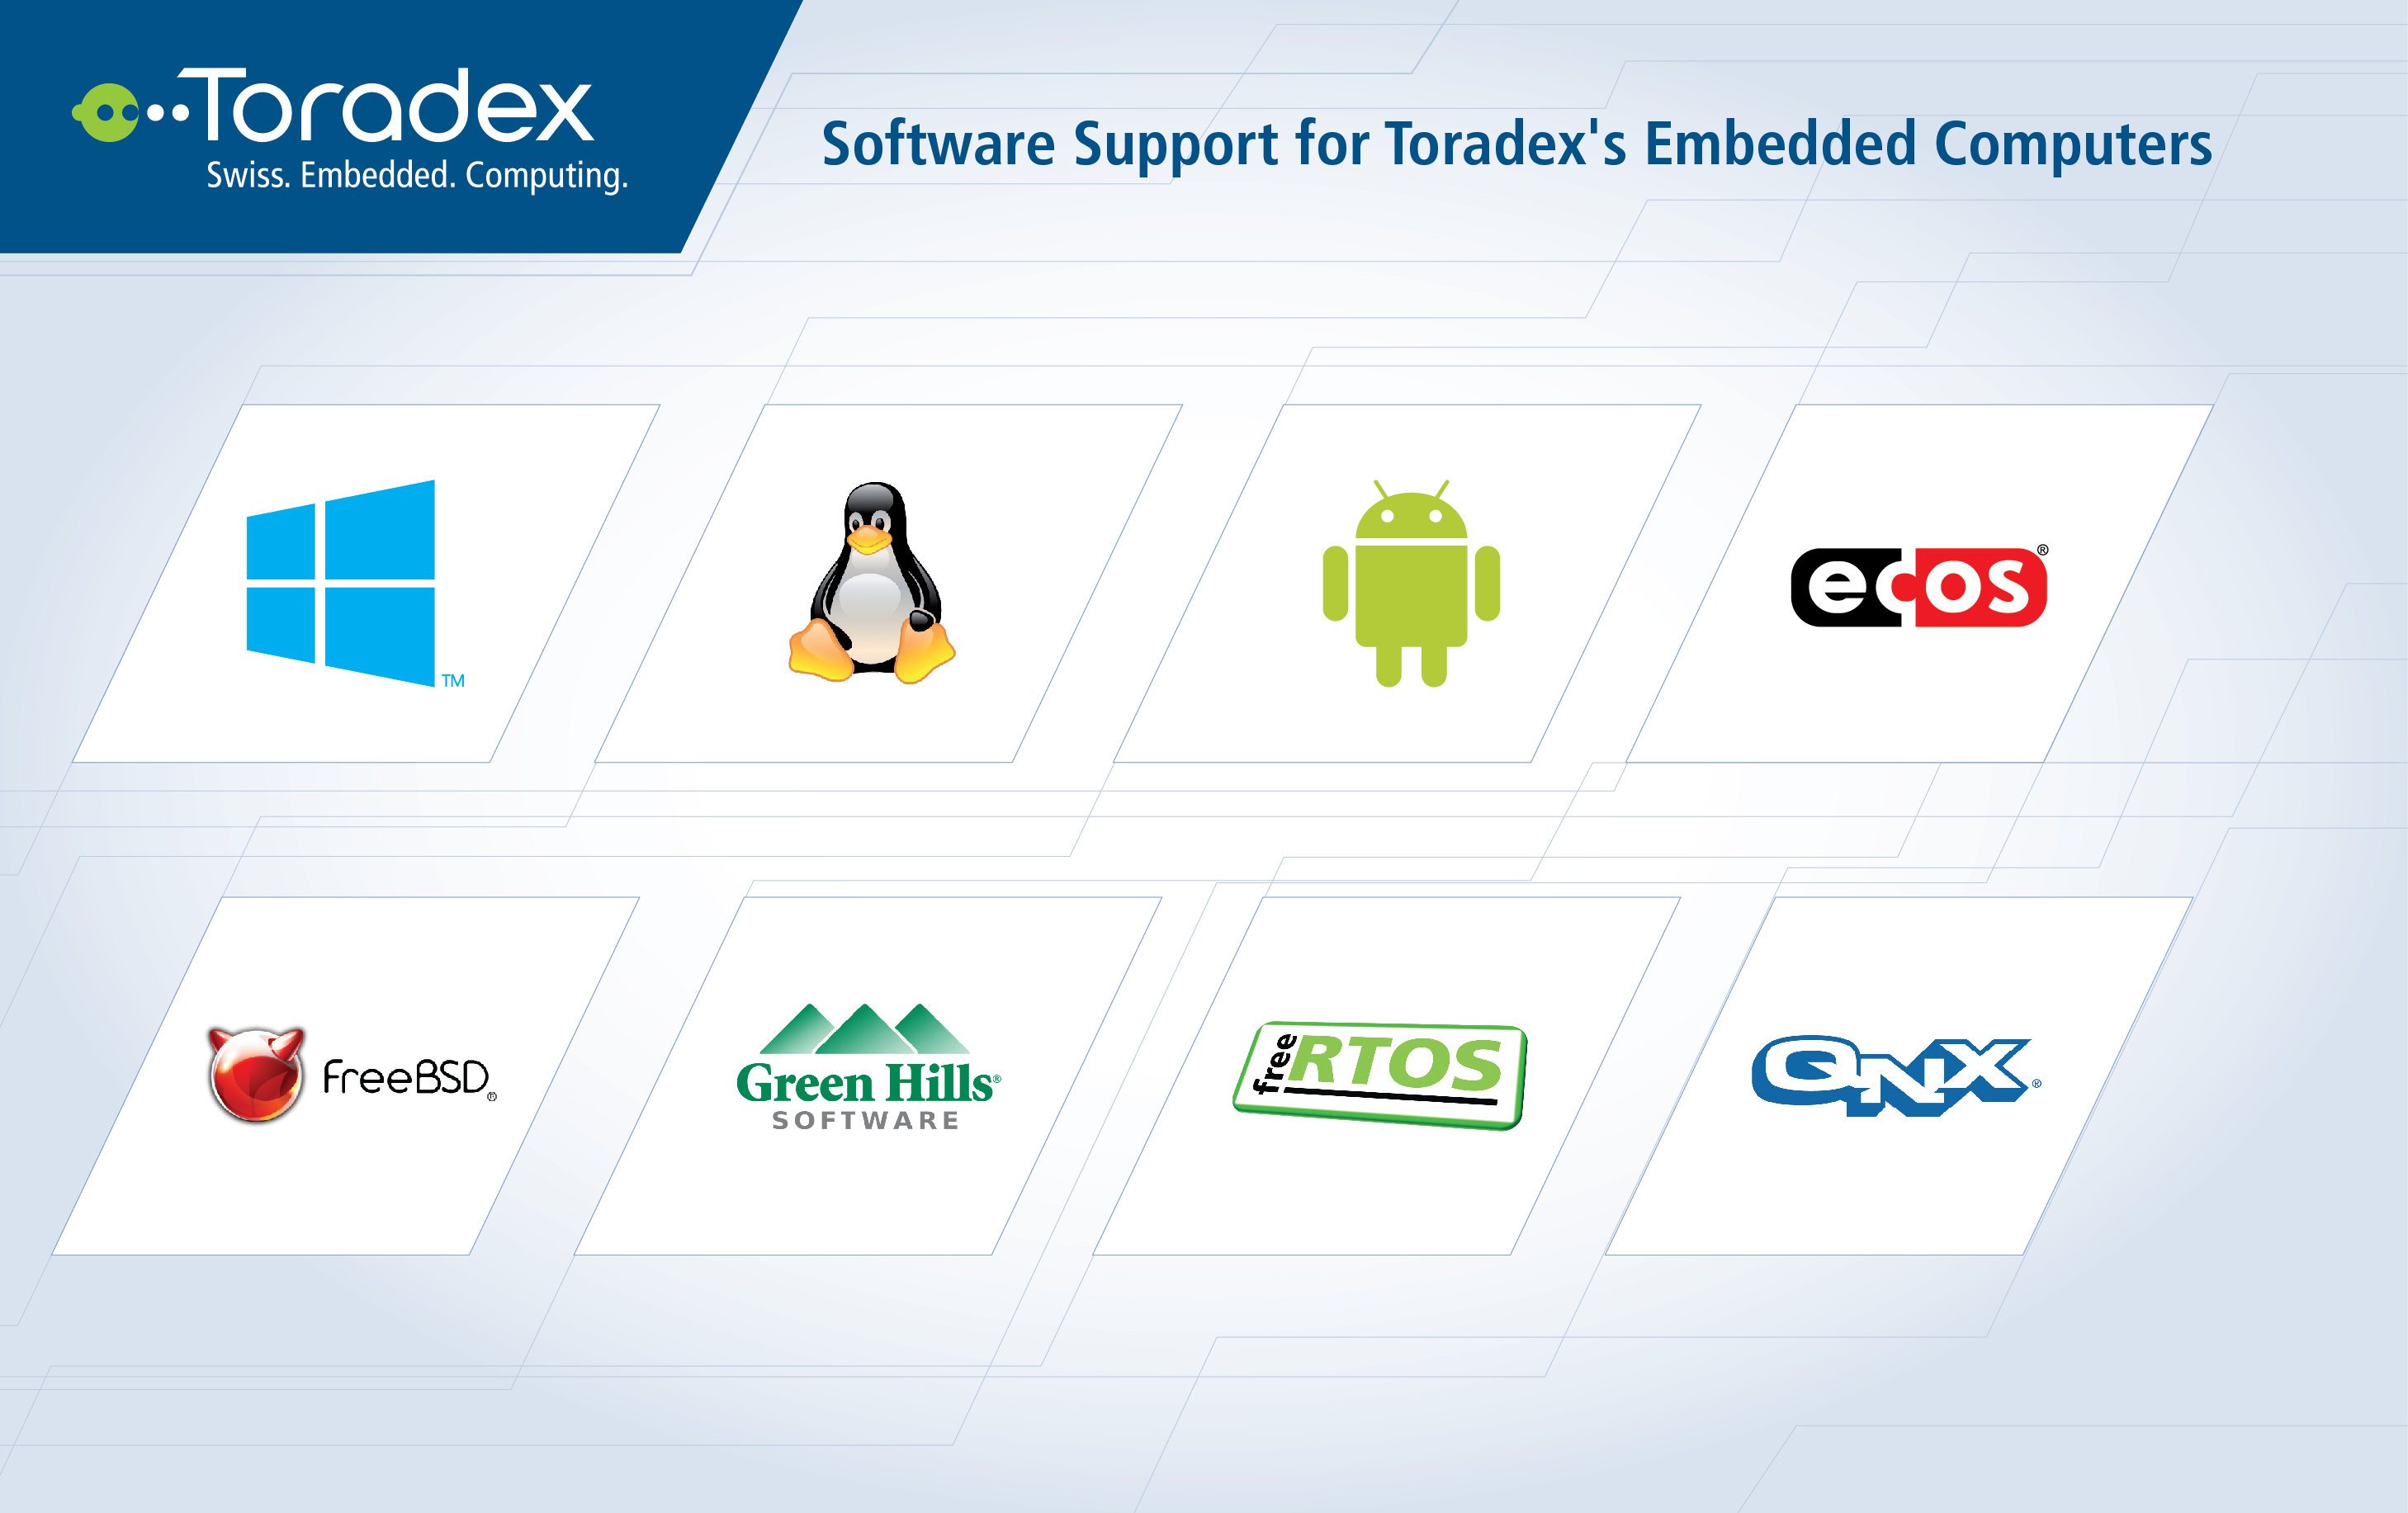 Software Support for Toradex's Embedded Computers